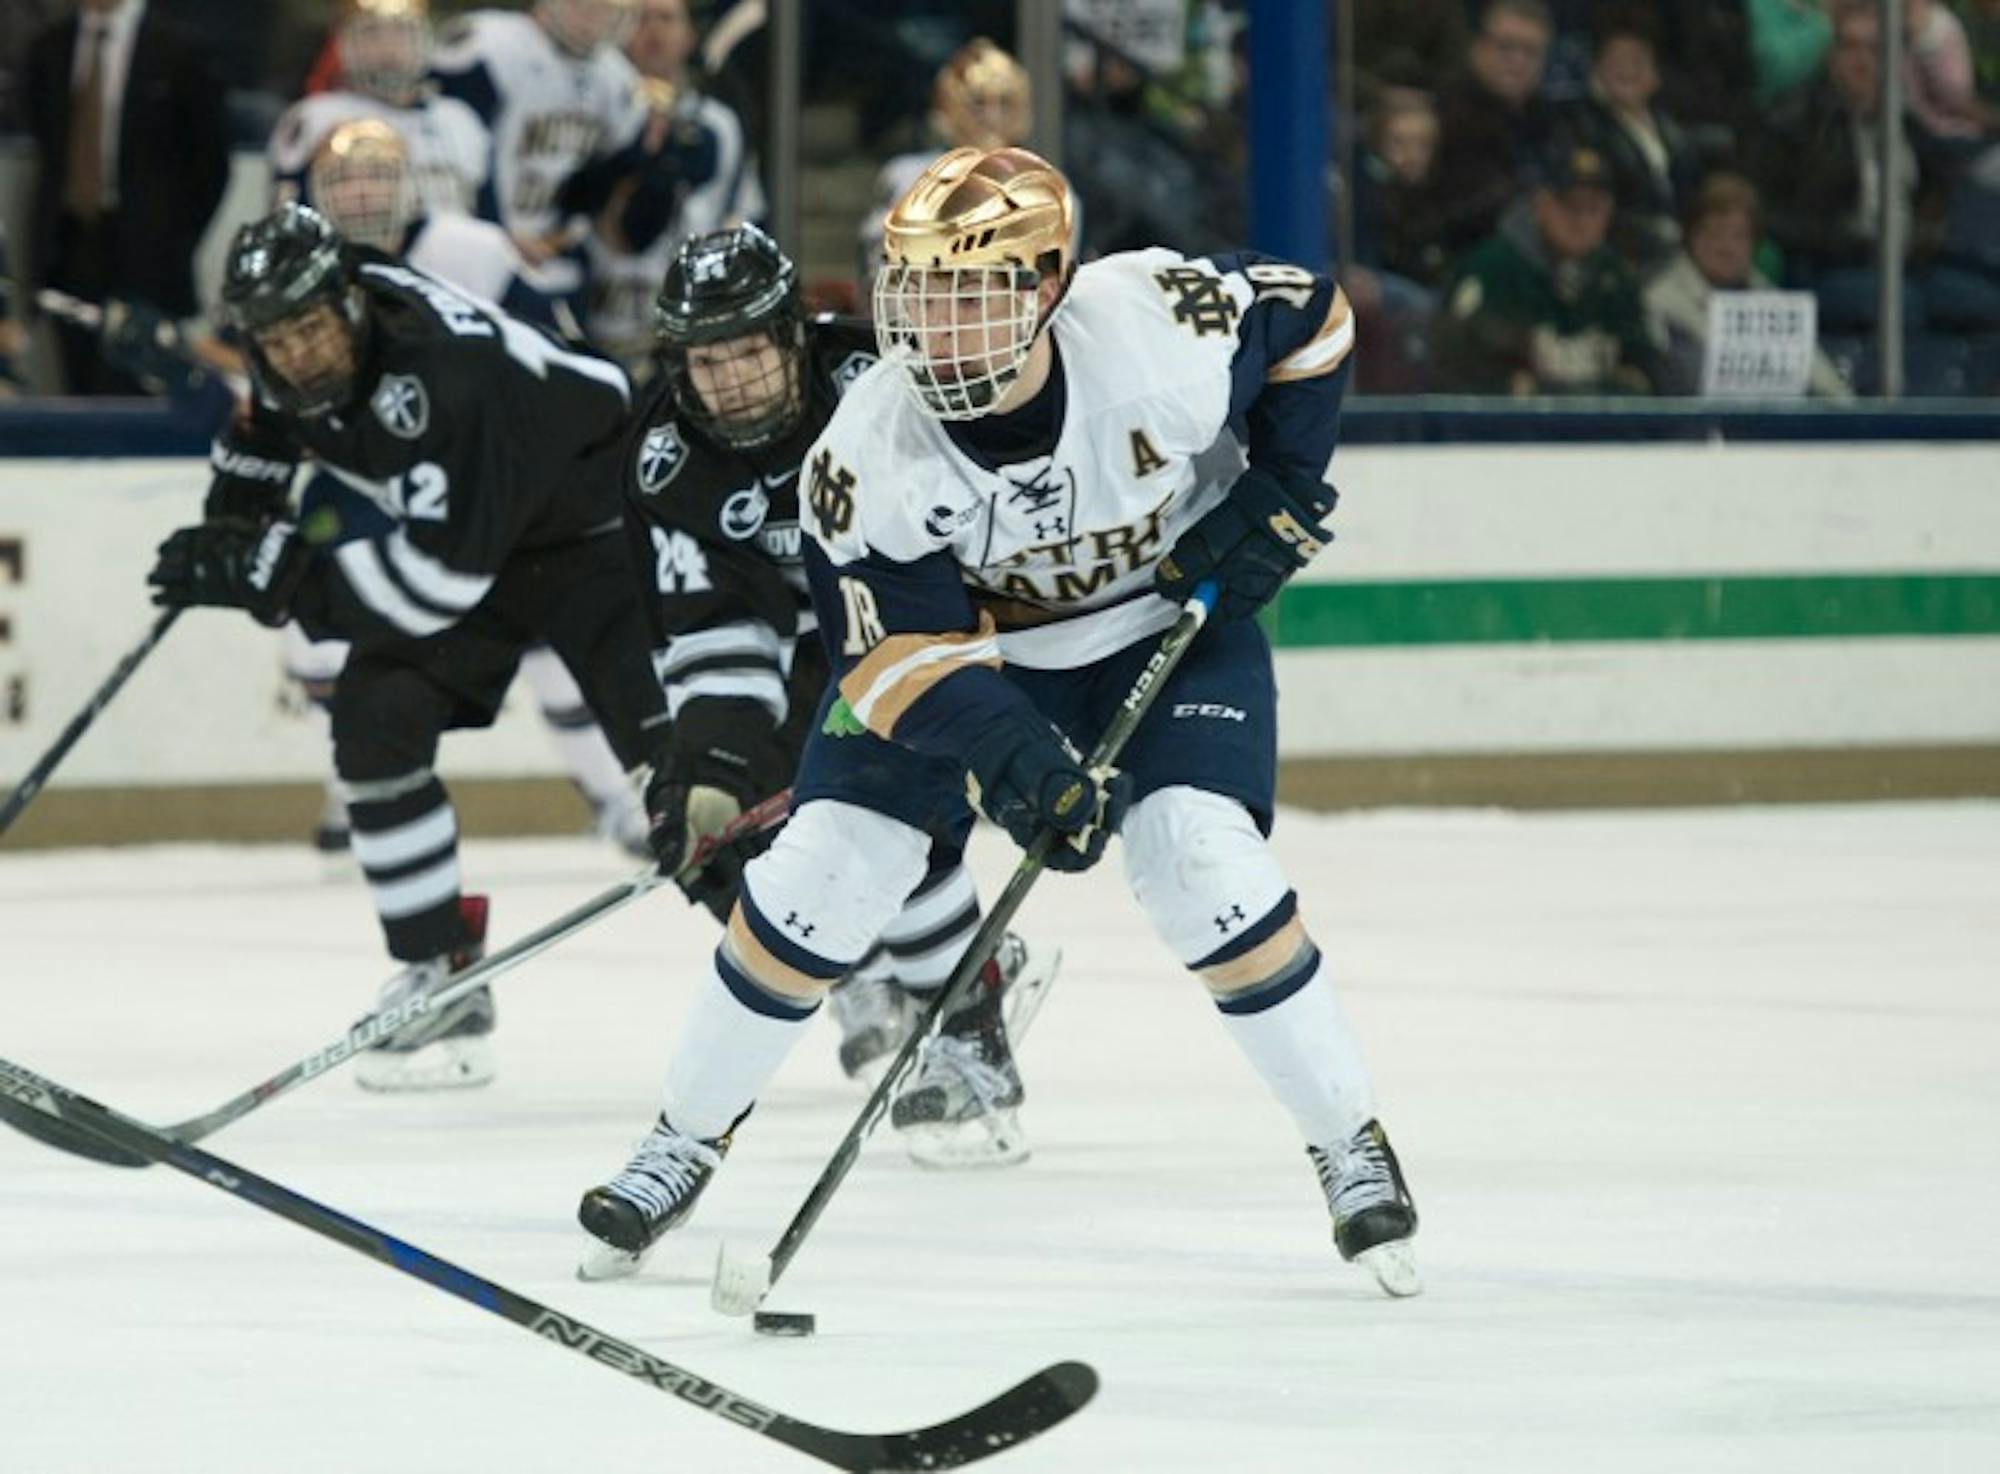 Irish senior forward Jake Evans carries the puck up the ice during Notre Dame’s 5-2 win over Providence on March 11.